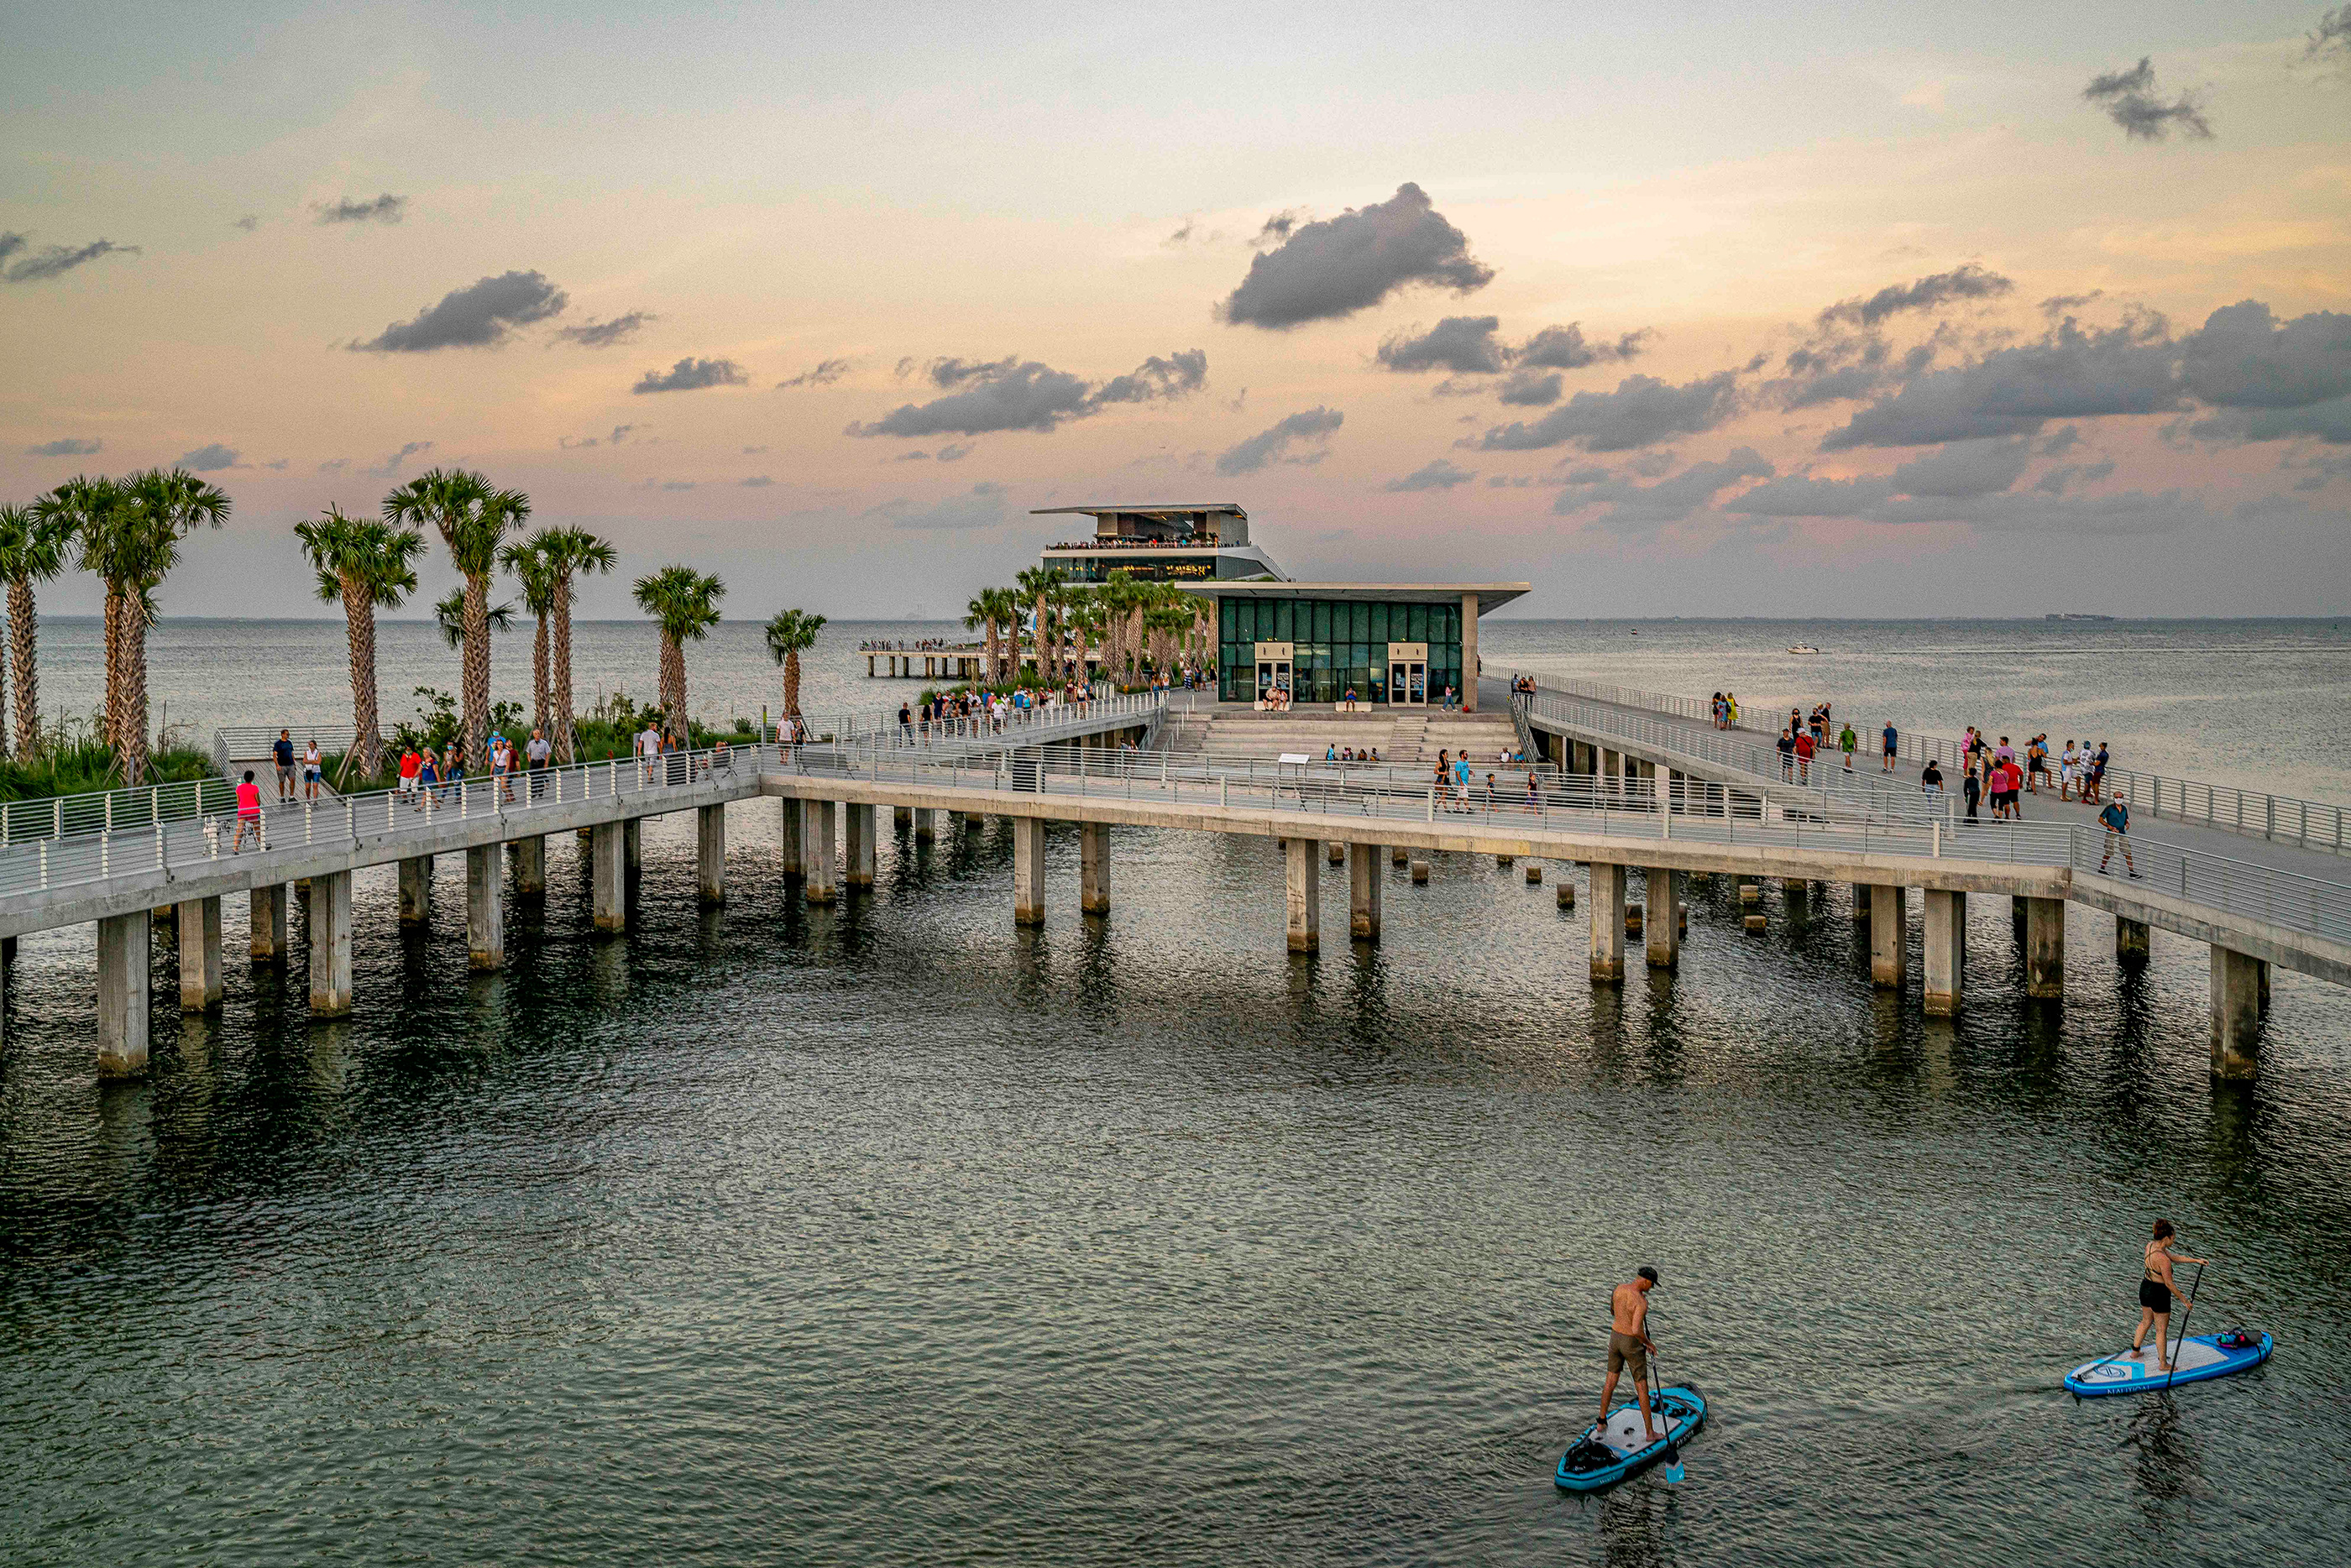 St. Pete Pier is a shining addition to Tampa Bay